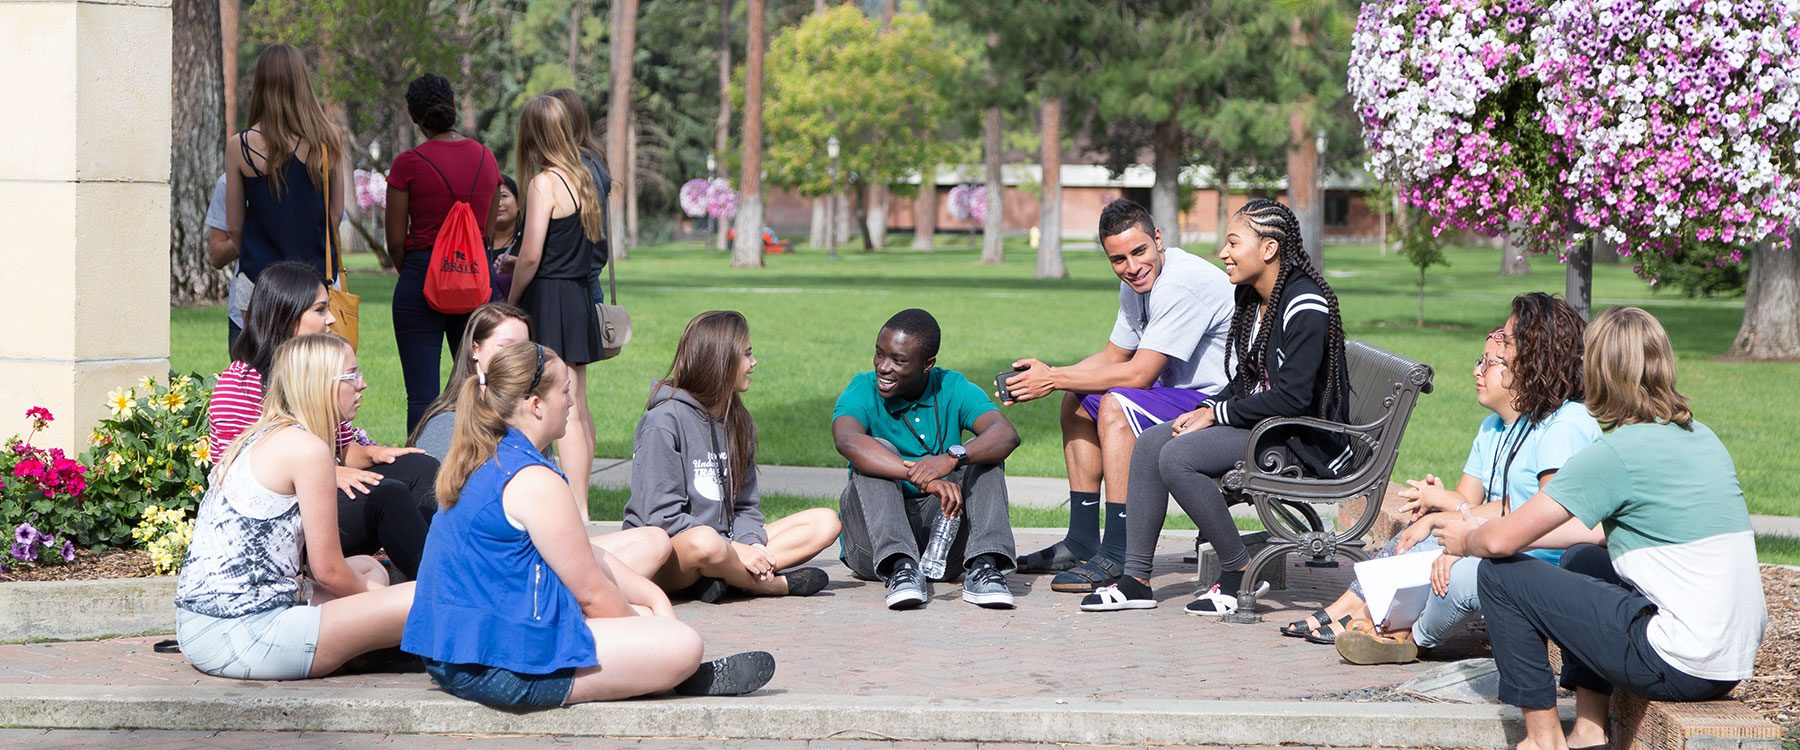 A diverse group of students sit in a circle somewhere on campus. They smile and talk.